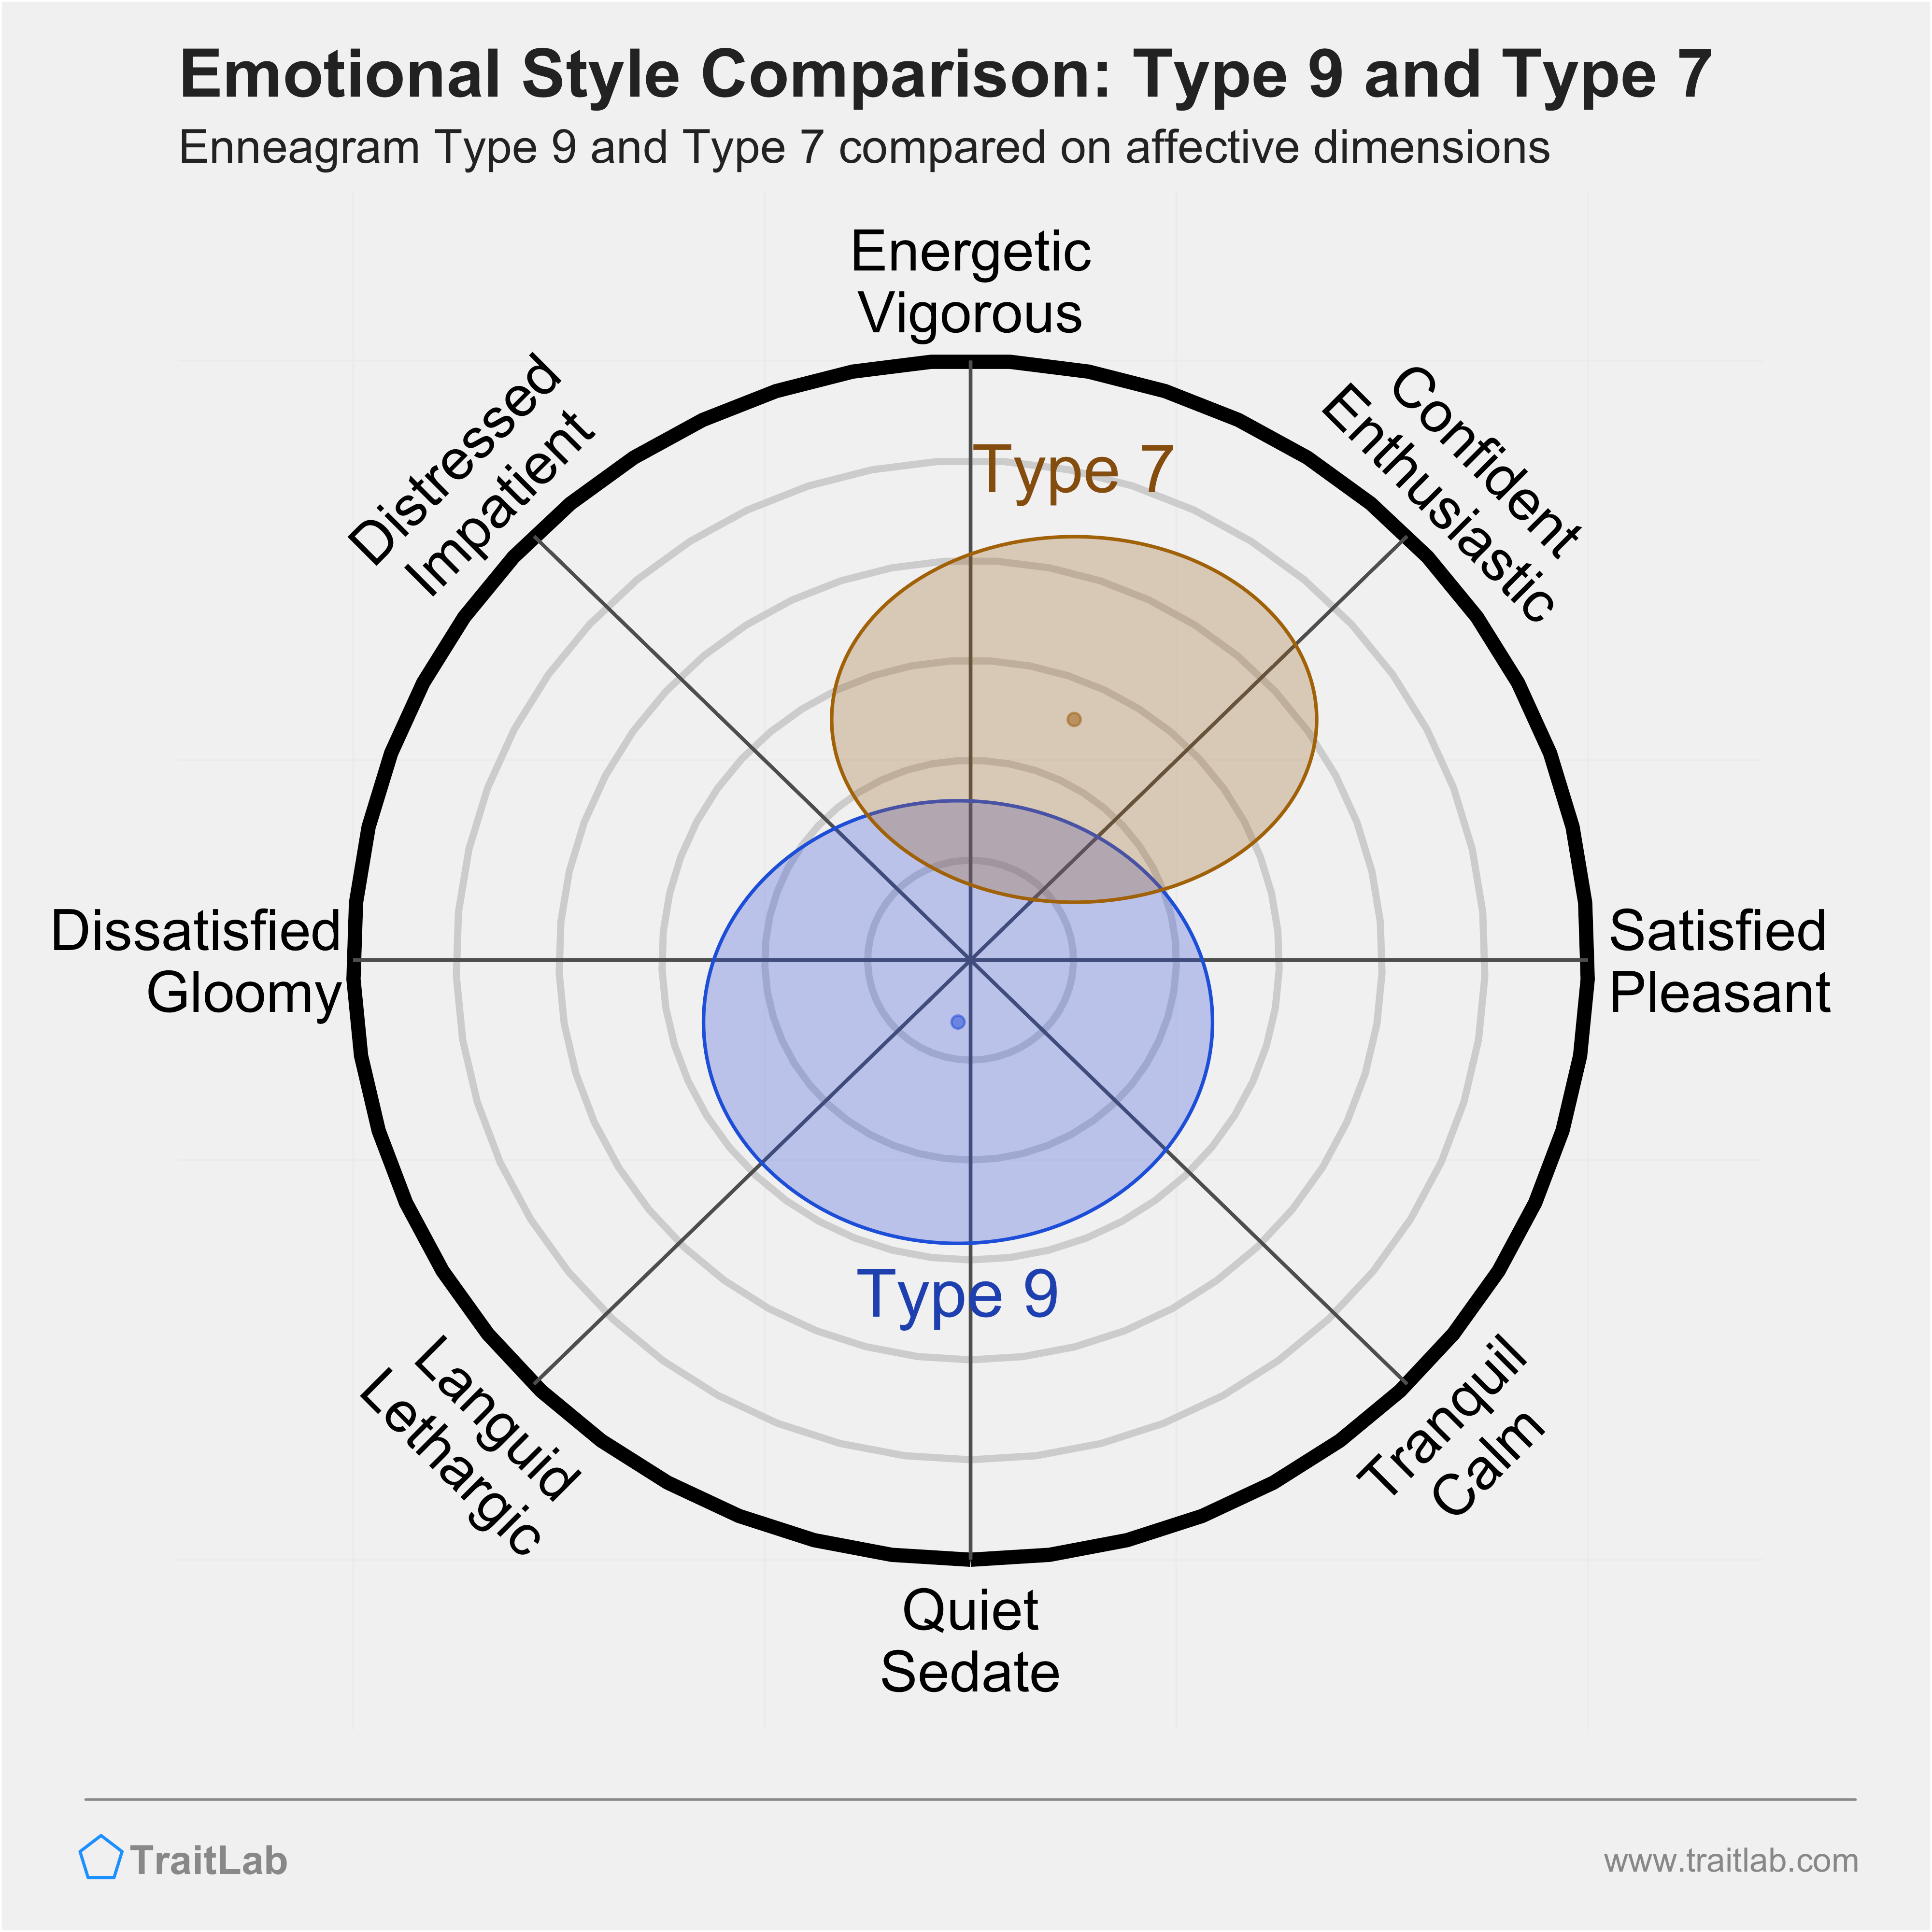 Type 9 and Type 7 comparison across emotional (affective) dimensions